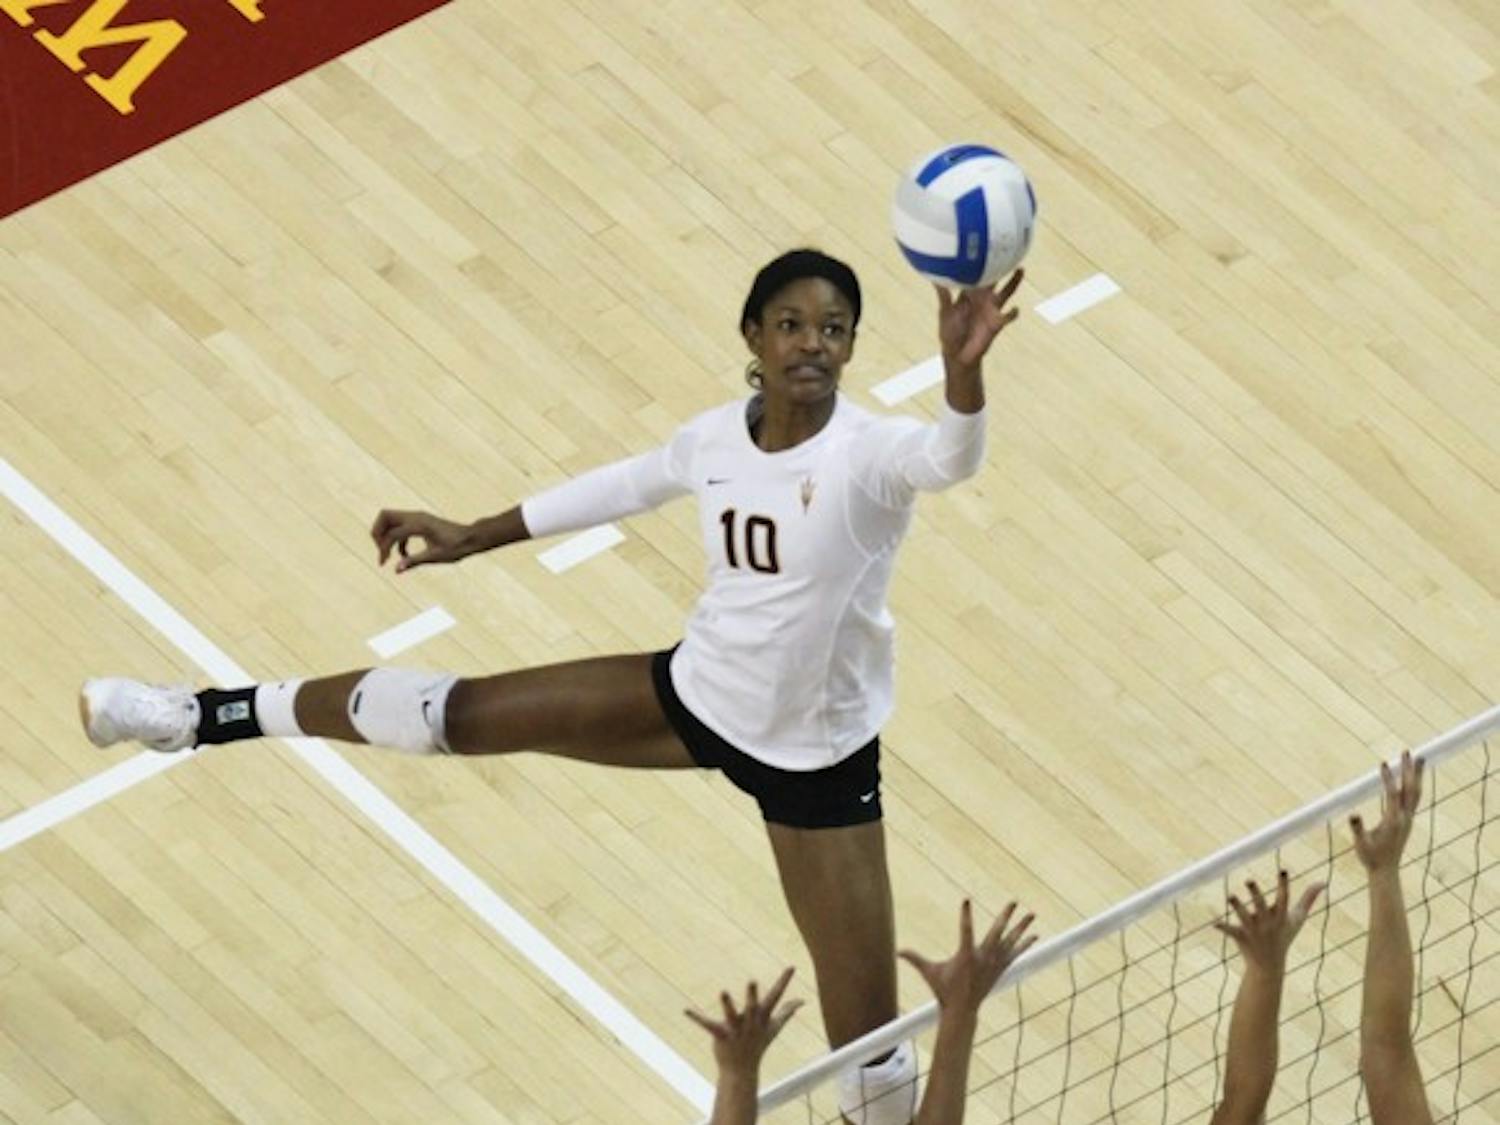 Senior Erica Wilson goes up for a spike during the ASU Sheraton Invitational on Friday, Sept. 14, 2012 at Wells Fargo Arena.